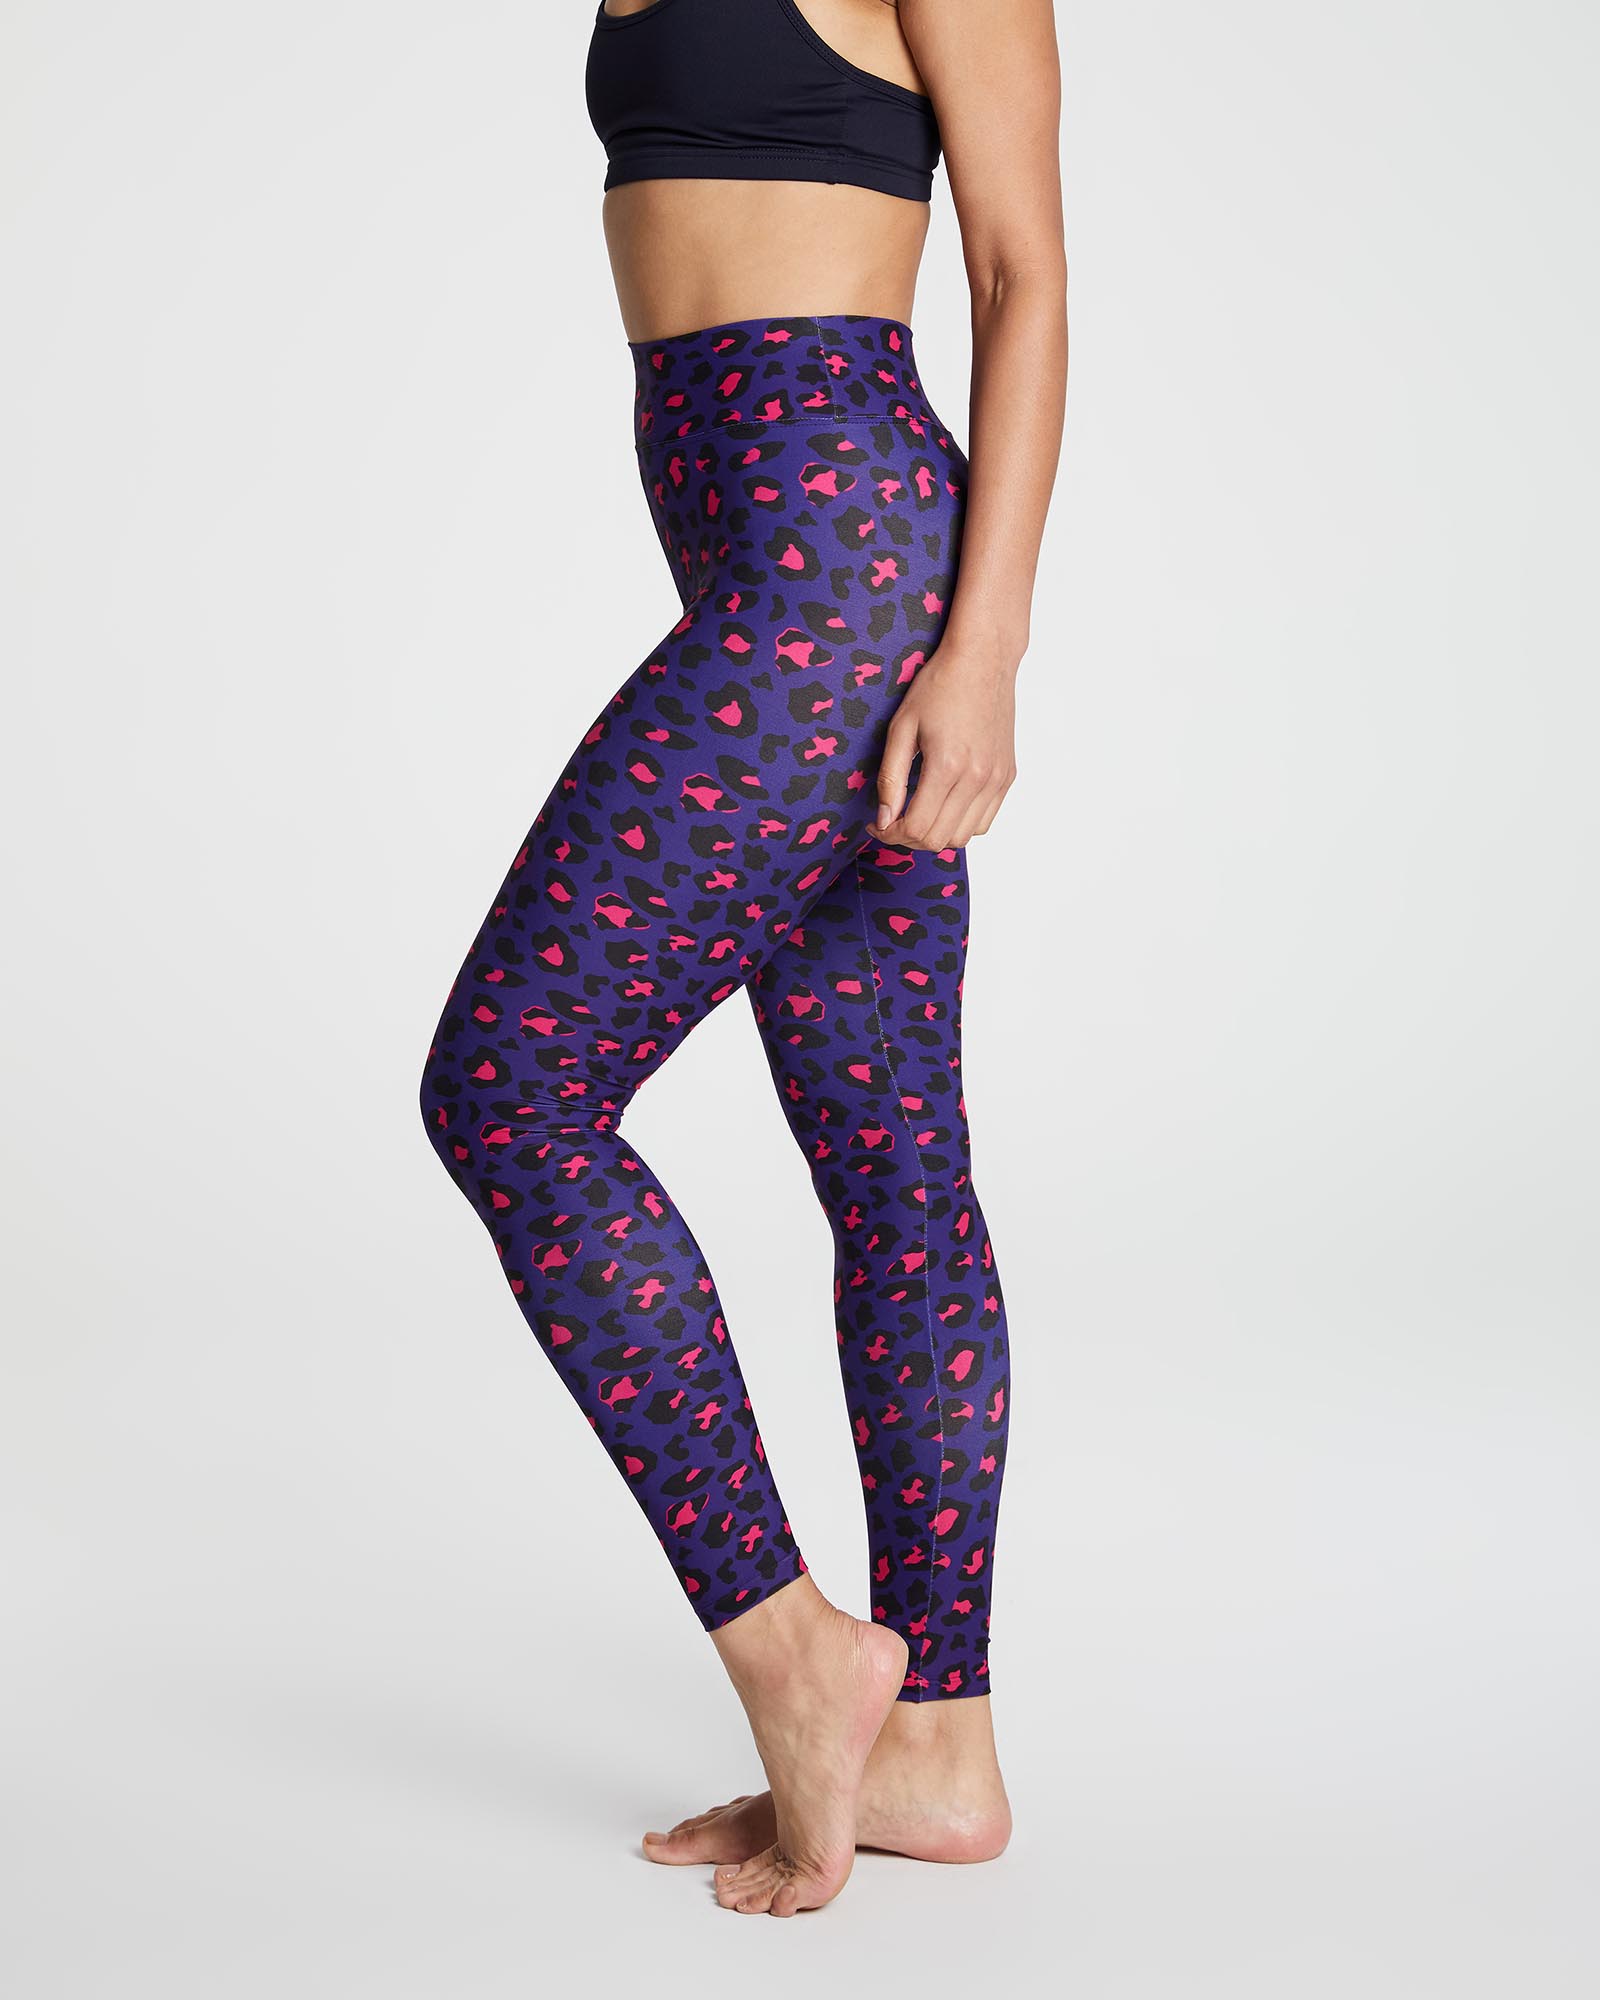 NEW ARRIVAL!! Liquido Active Extra Long “Chañar” Eco Leggings from the  Chilean Allure Collection  Symi Yoga – Yoga classes in  Stratford-Upon-Avon. Live Online Yoga, Yoga Studio Classes, One to One Yoga